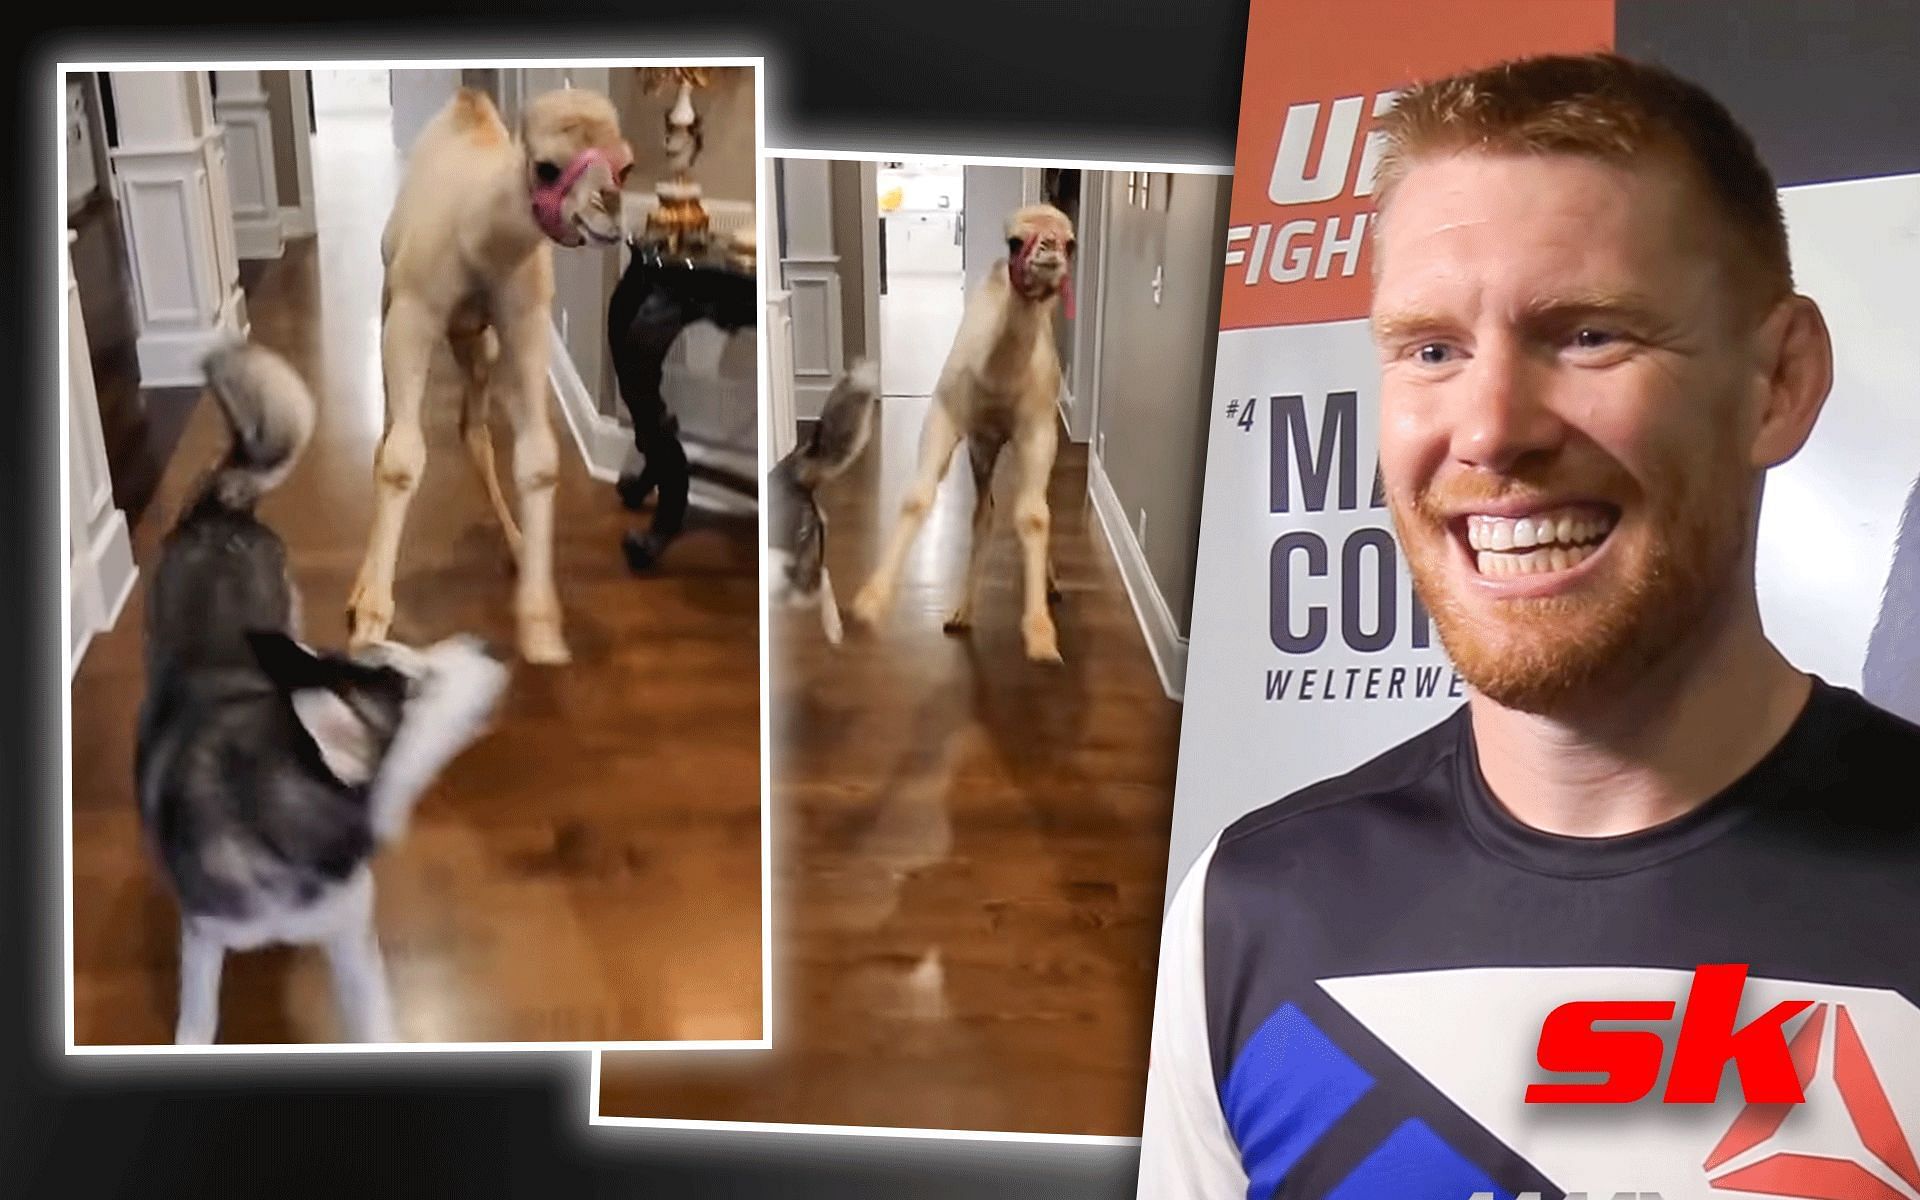 VIDEO: Adorable video of UFC middleweight Sam Alvey getting greeted by his pet camel  [Images via: Alvey from  MMAFightingonSBN | YouTube, rest from @smilensam on Instagram]